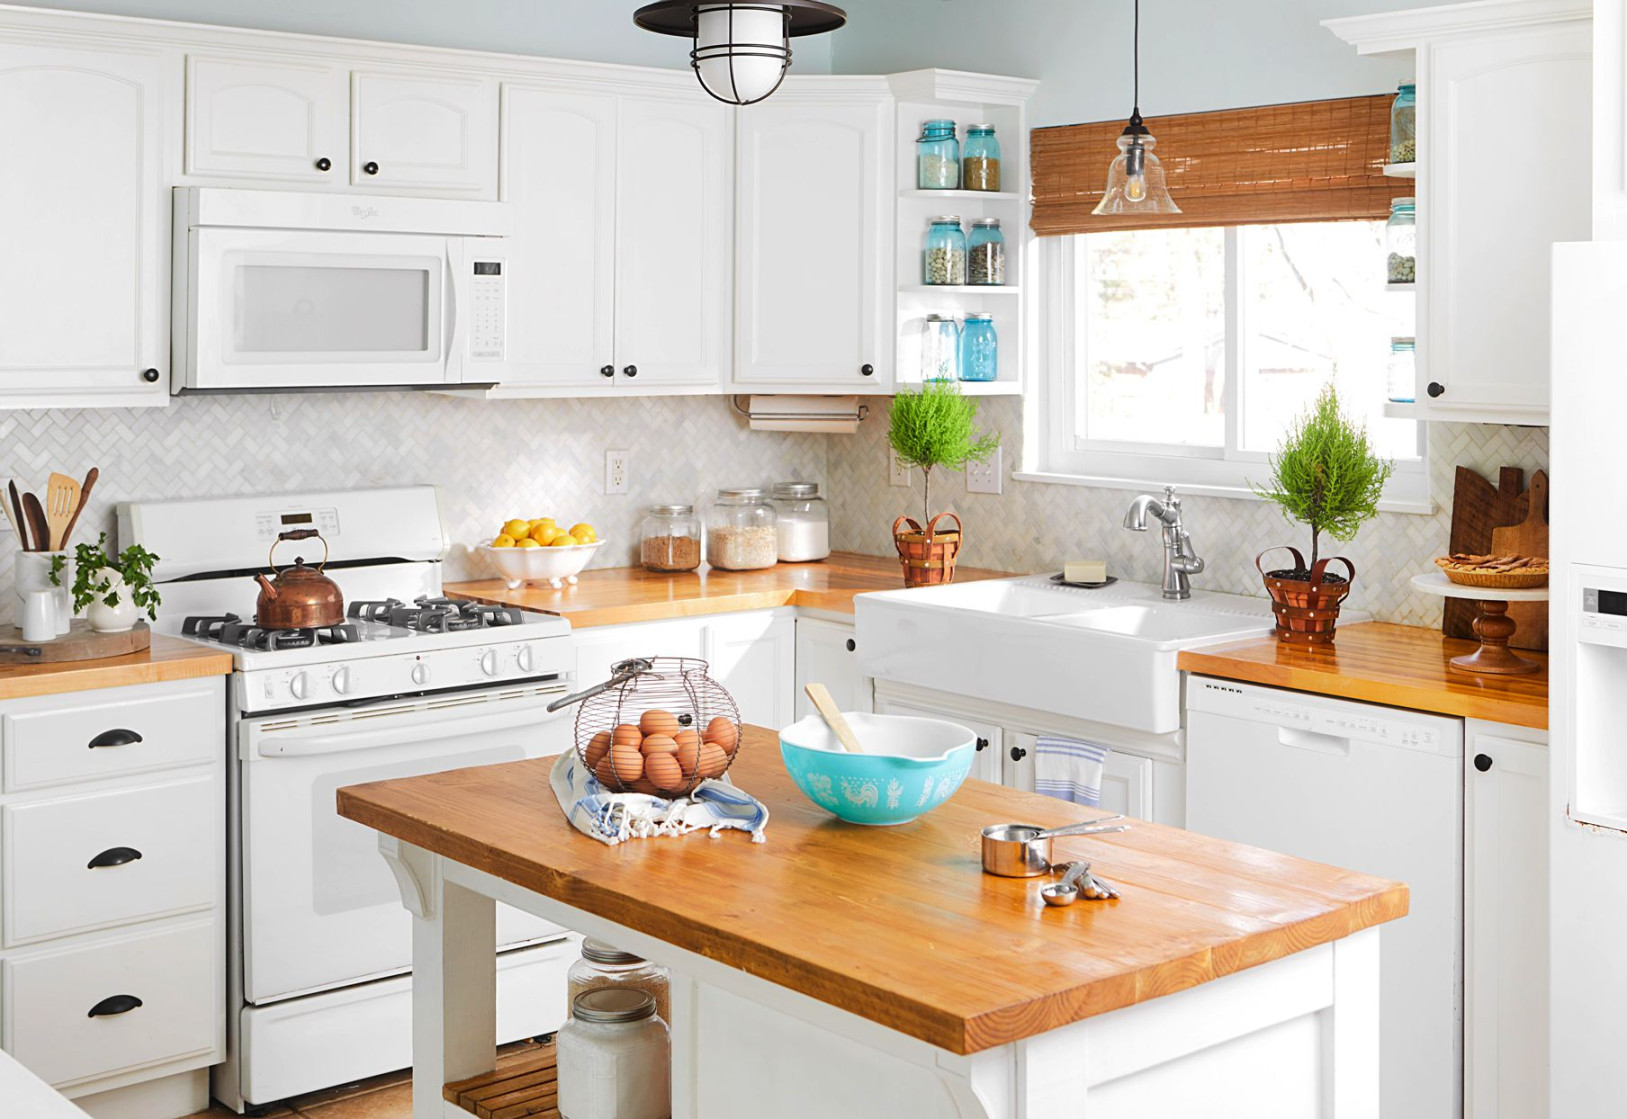 Stylish Ideas for Remodeling a Kitchen on a Budget